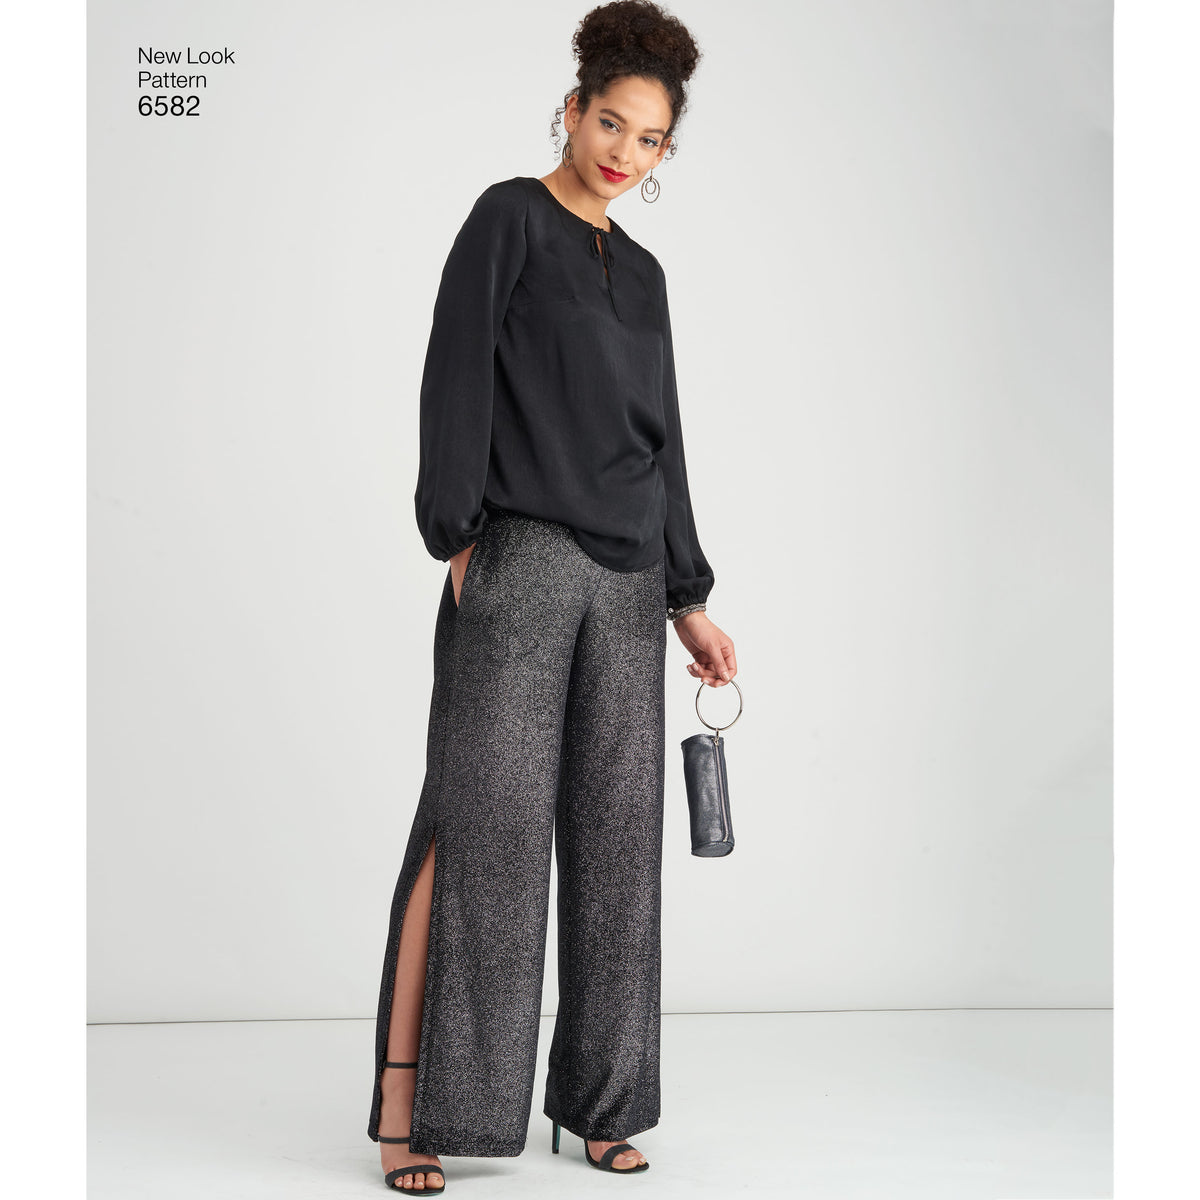 6582 New Look Pattern 6582 Misses' Pant, Top and Clutch